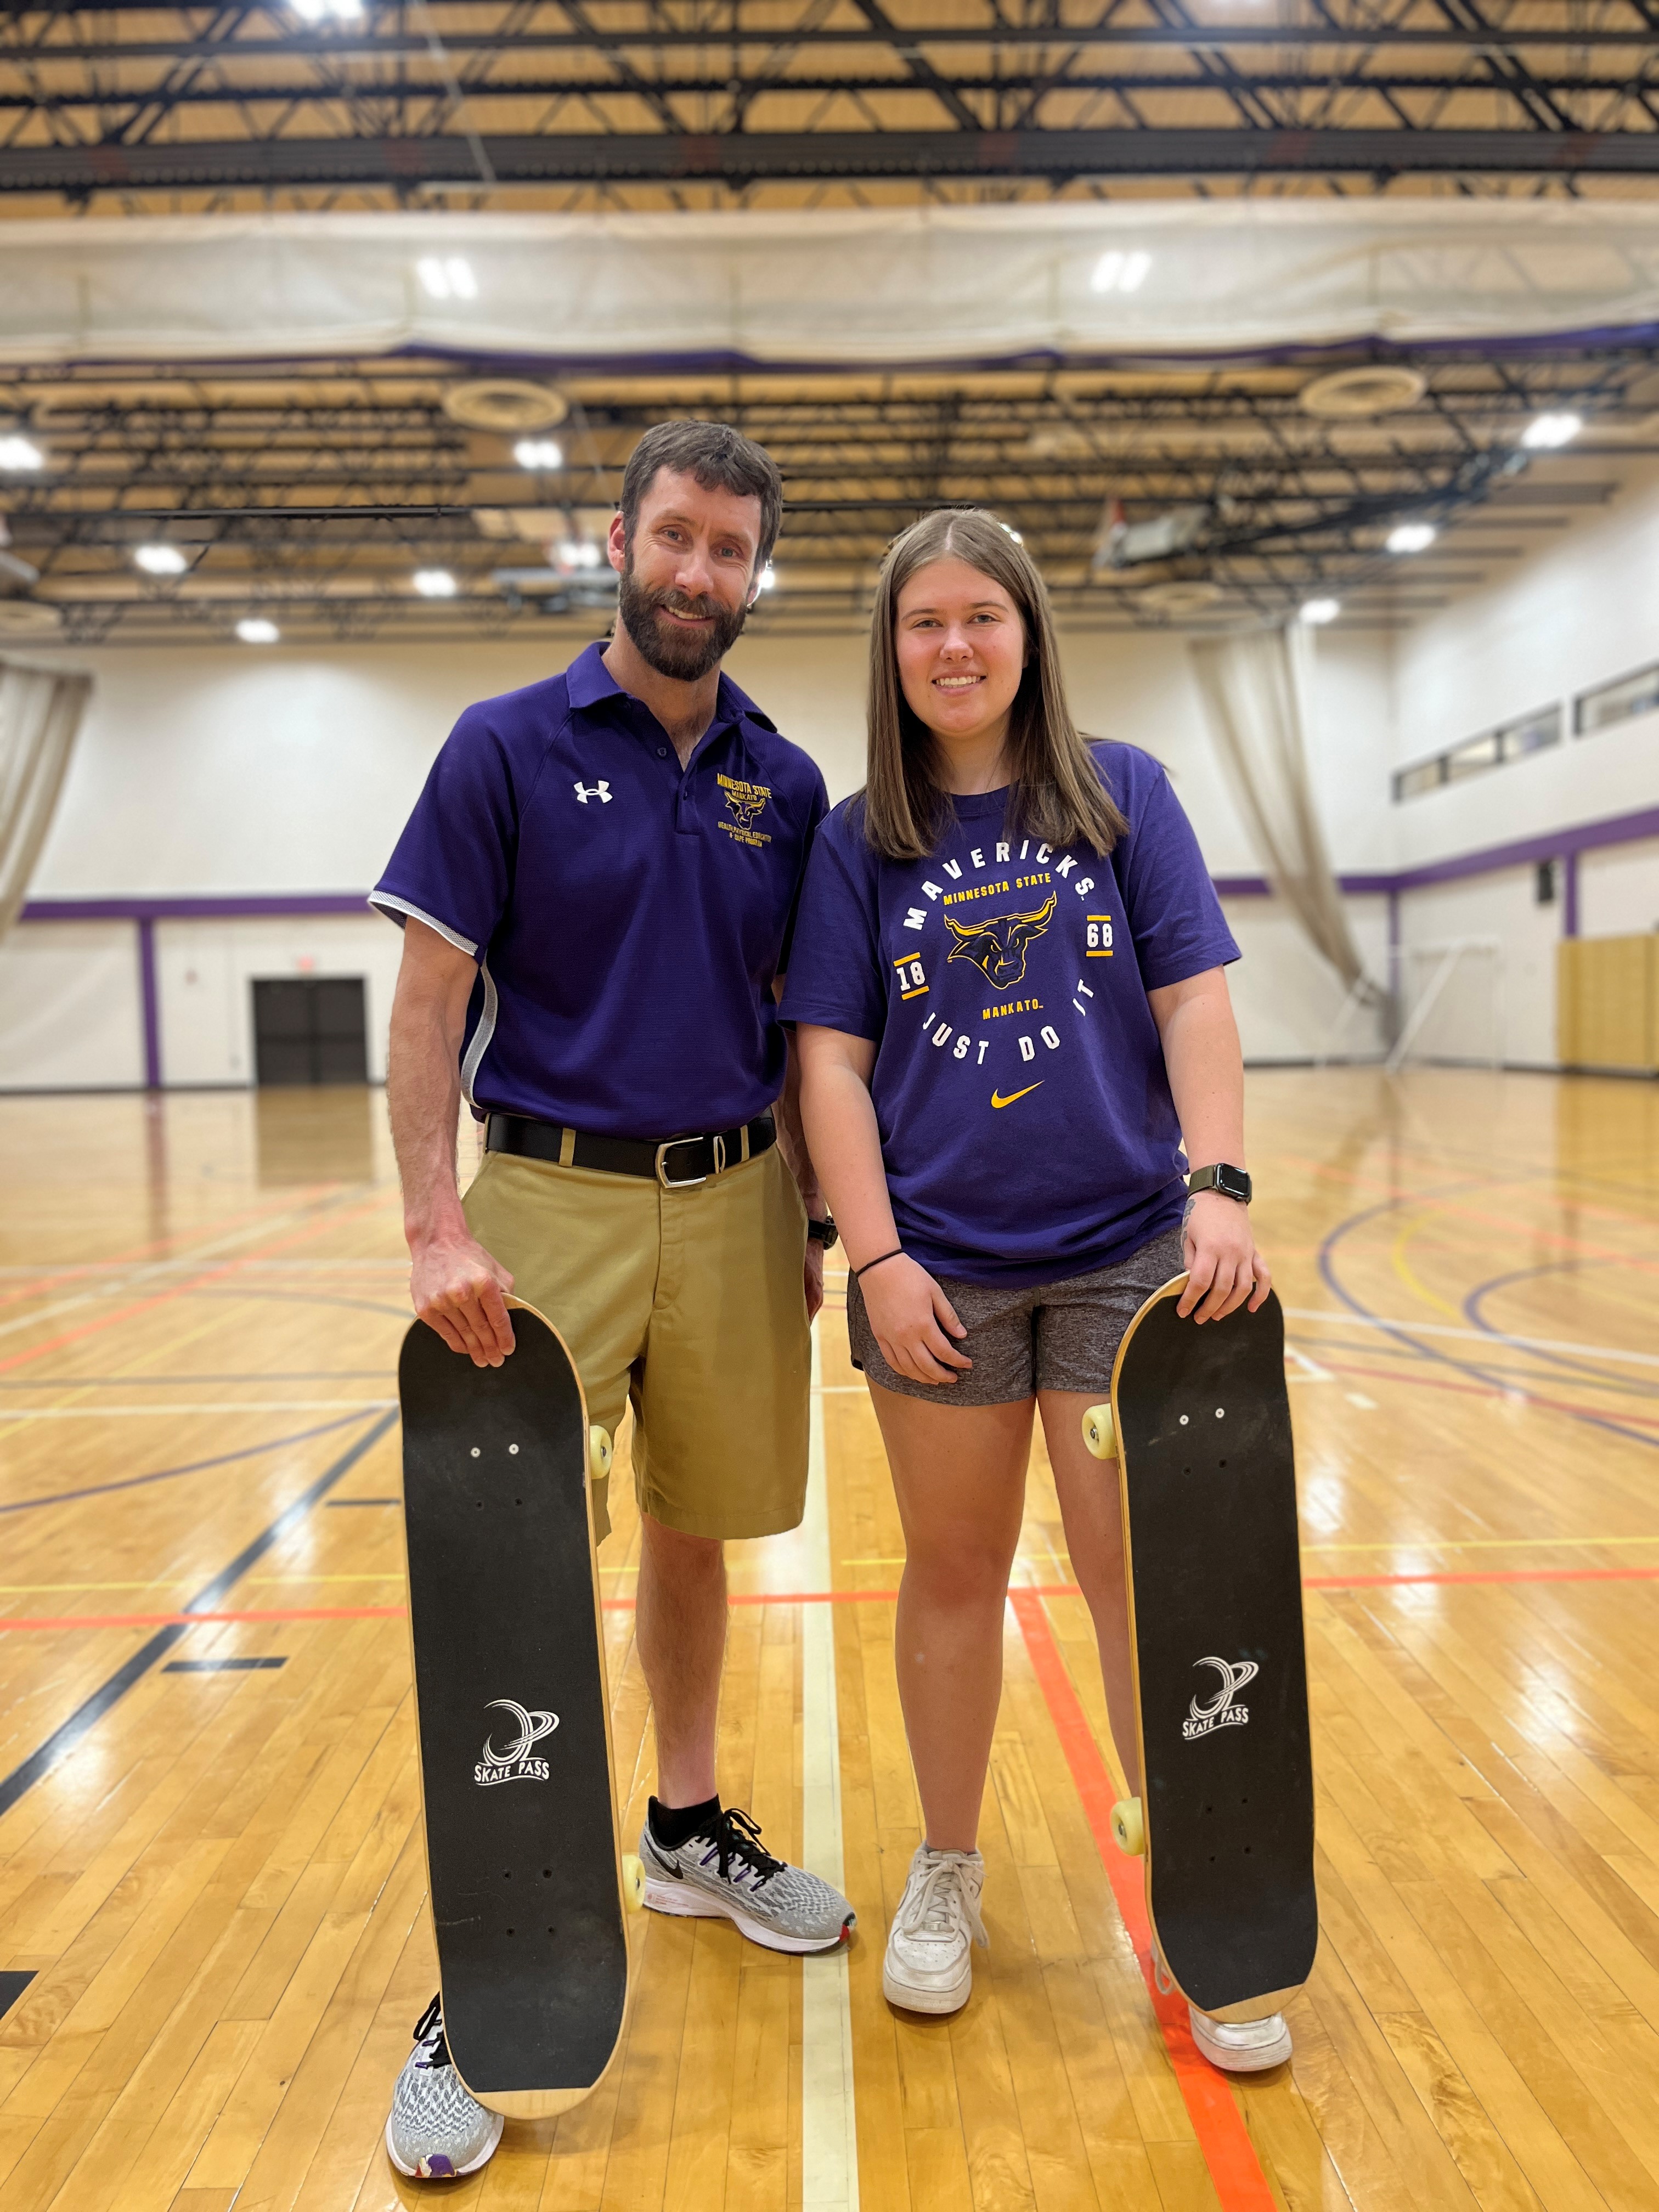 Professor Ben Schwamberger with student Mallory Stiff, in a gymnasium on campus, both holding skateboards.